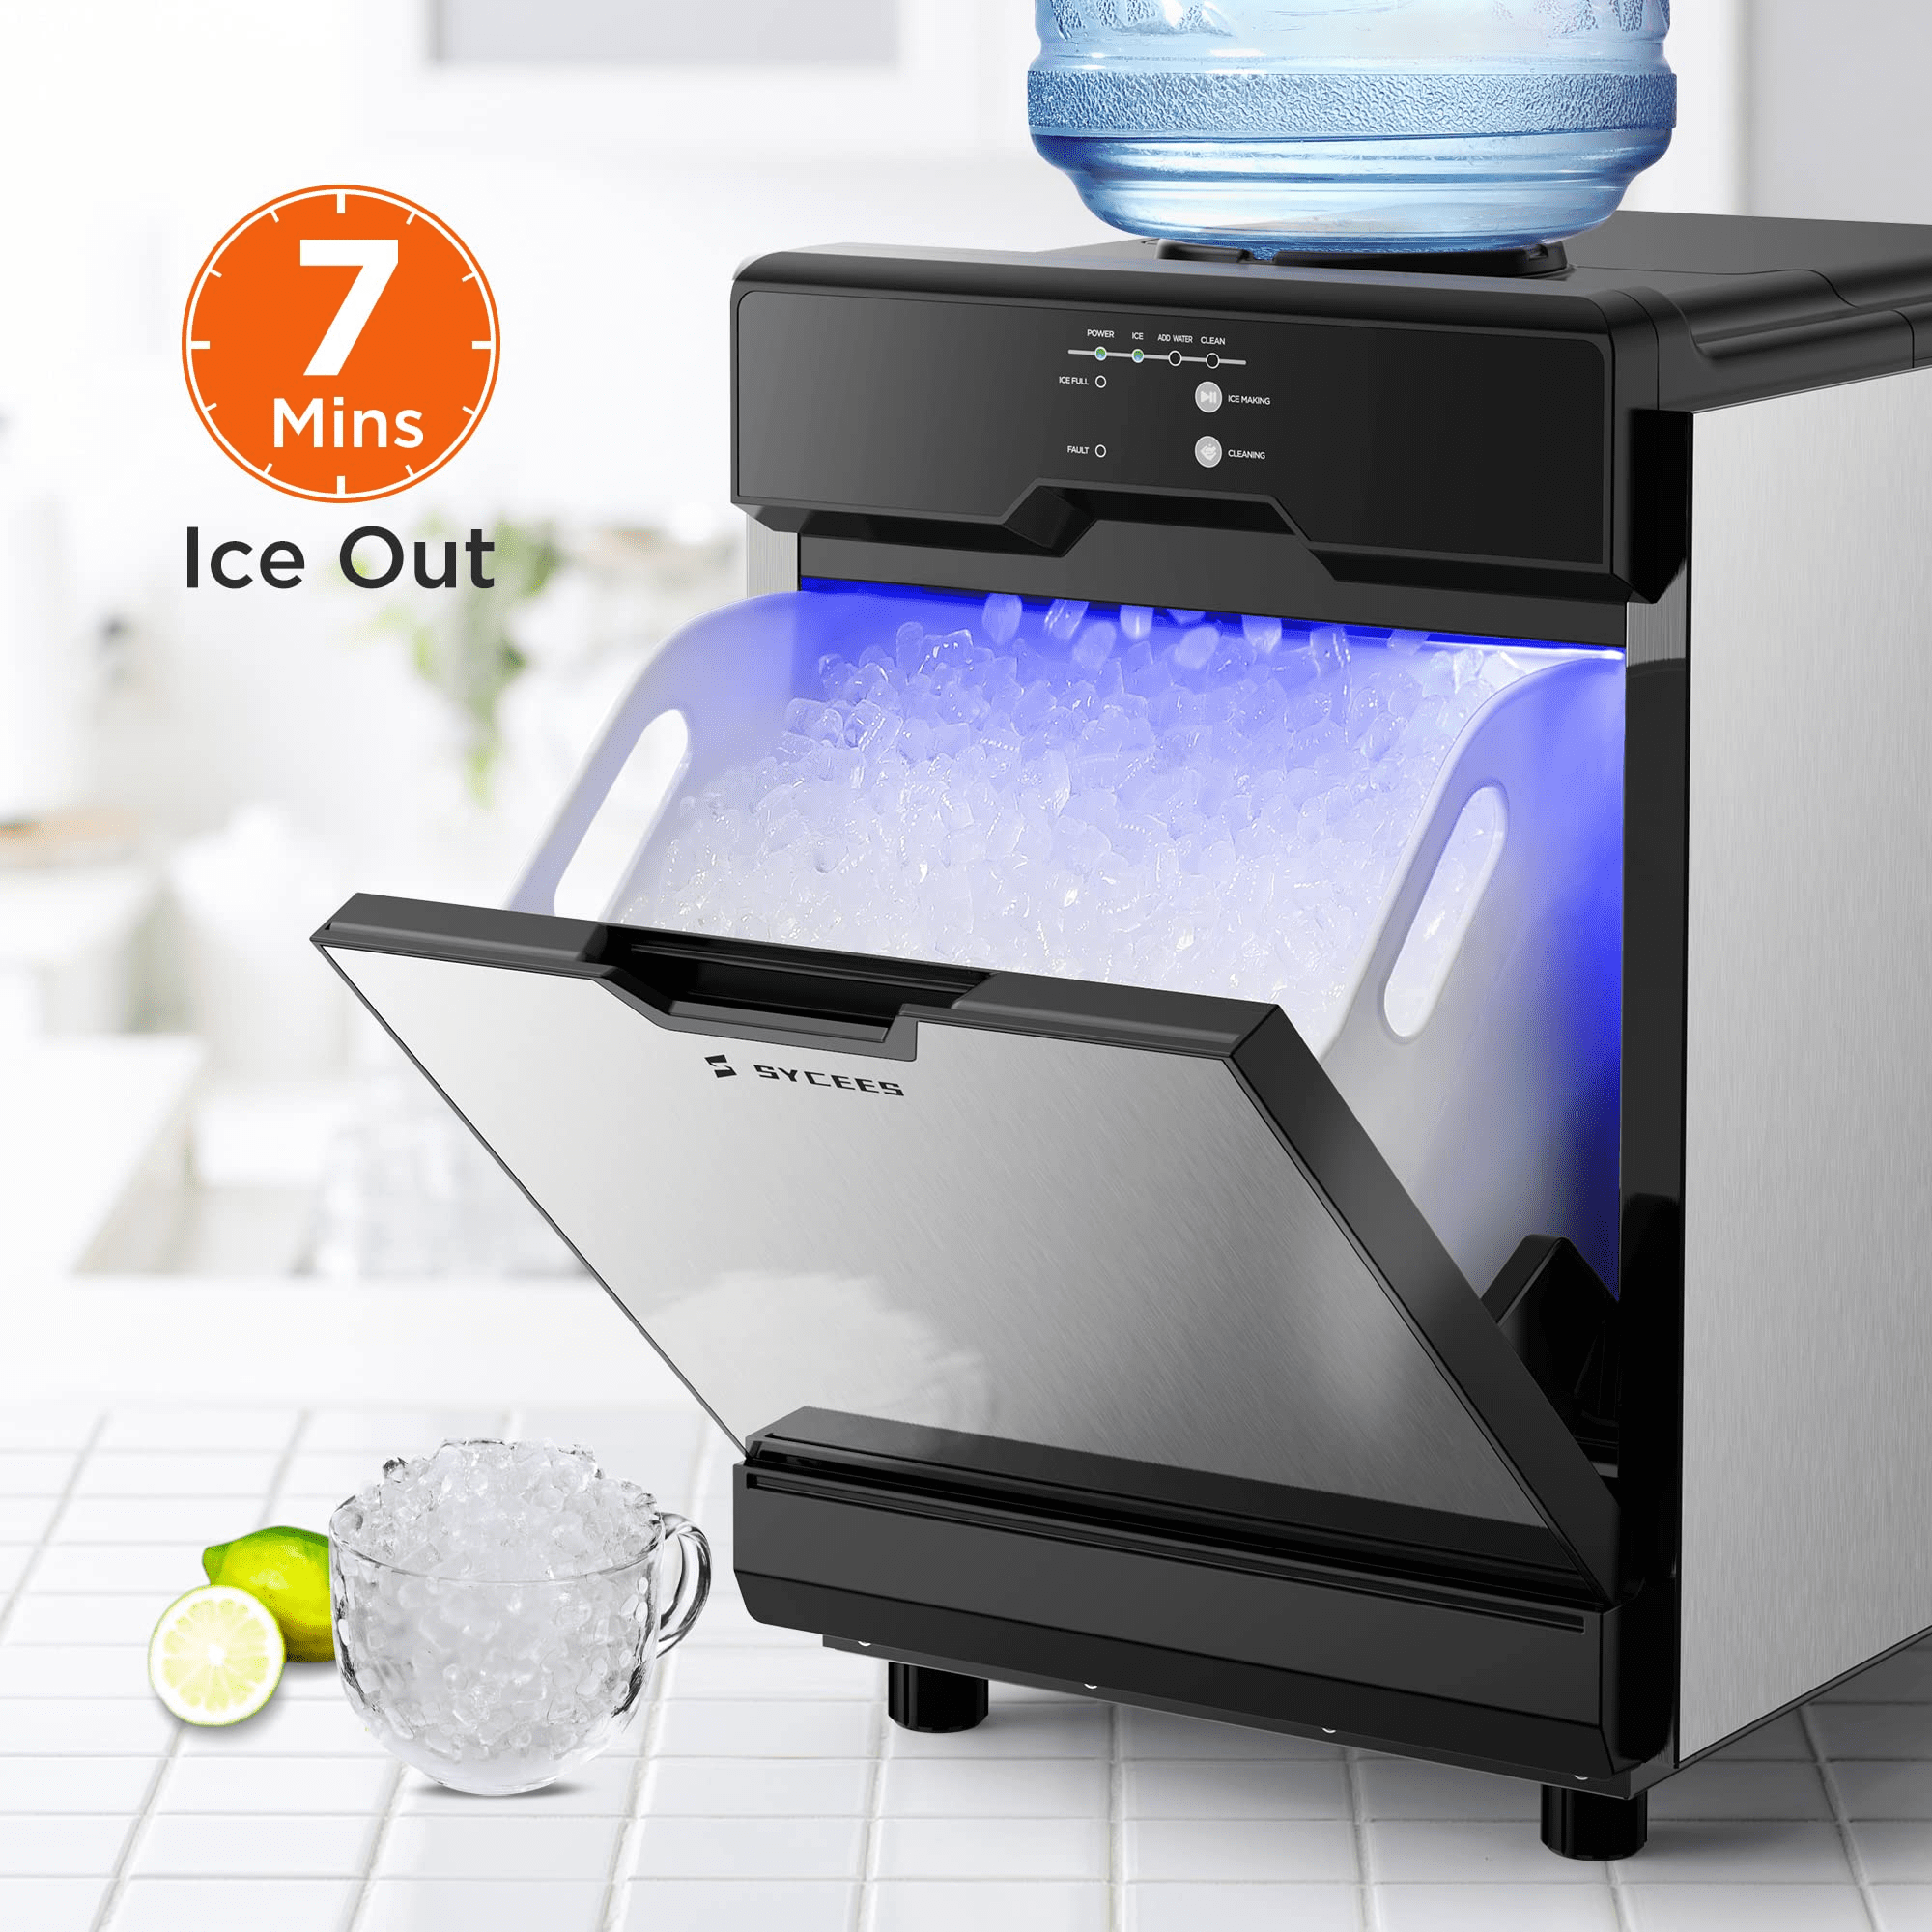  ARLIME Portable Nugget Ice Maker Machine for